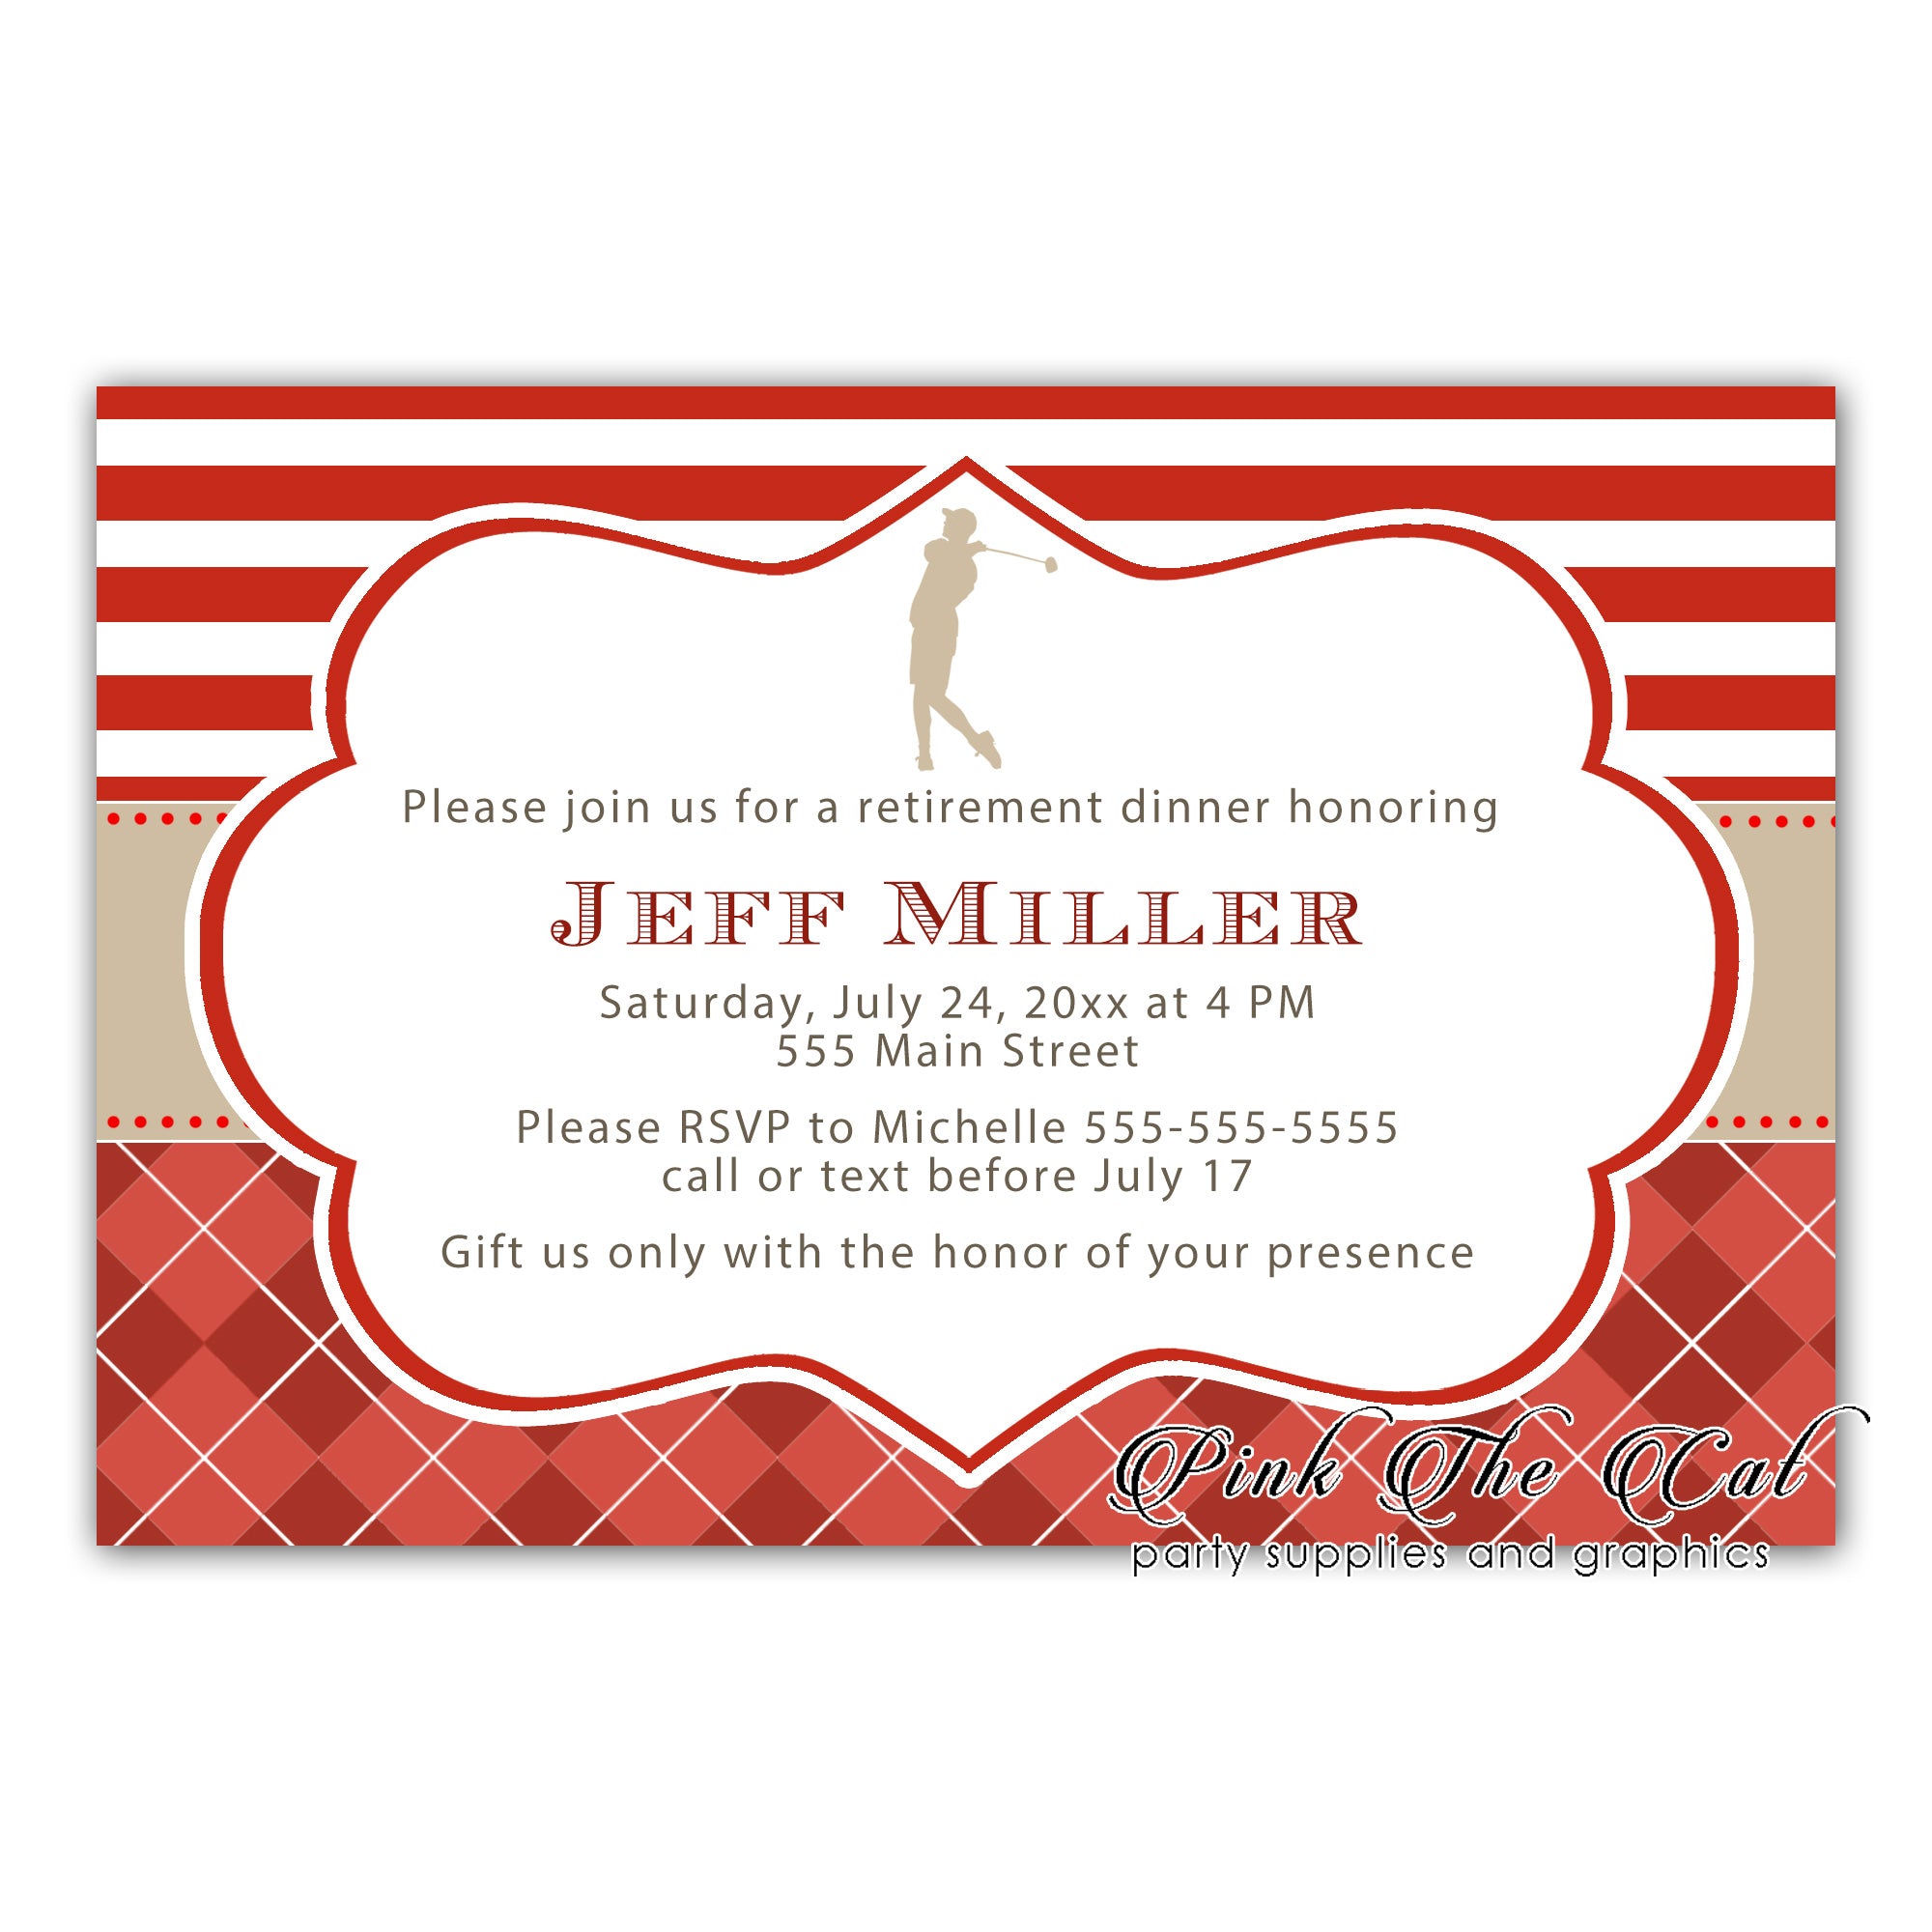 30 Golf invitations red gold adult birthday retirement party